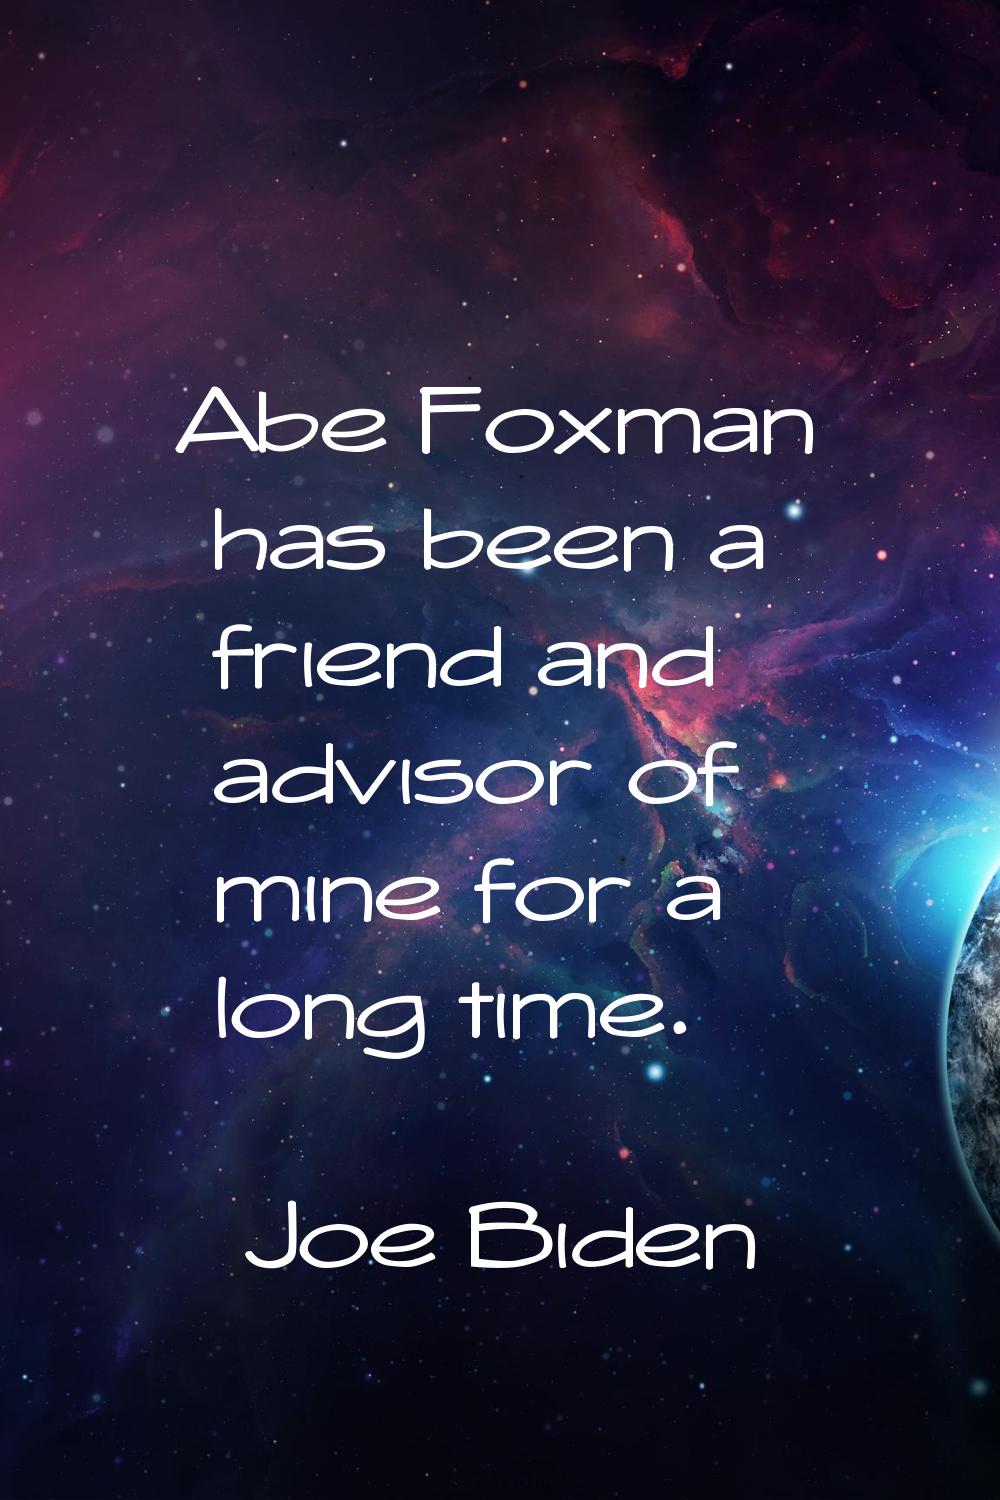 Abe Foxman has been a friend and advisor of mine for a long time.